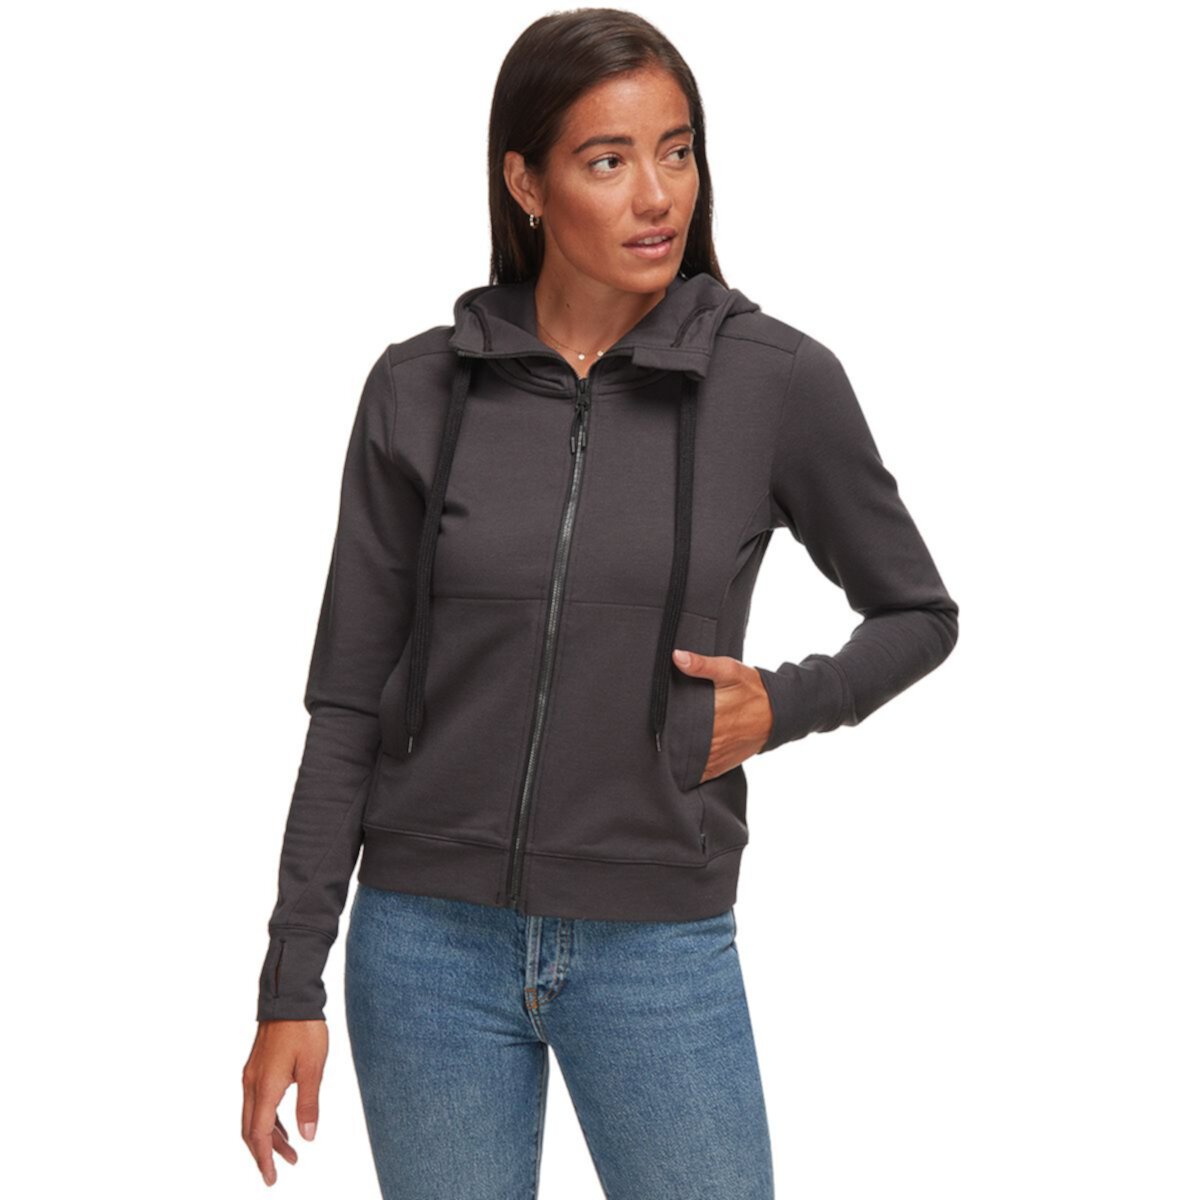 Backcountry Full-Zip Stretch Hoodie Backcountry